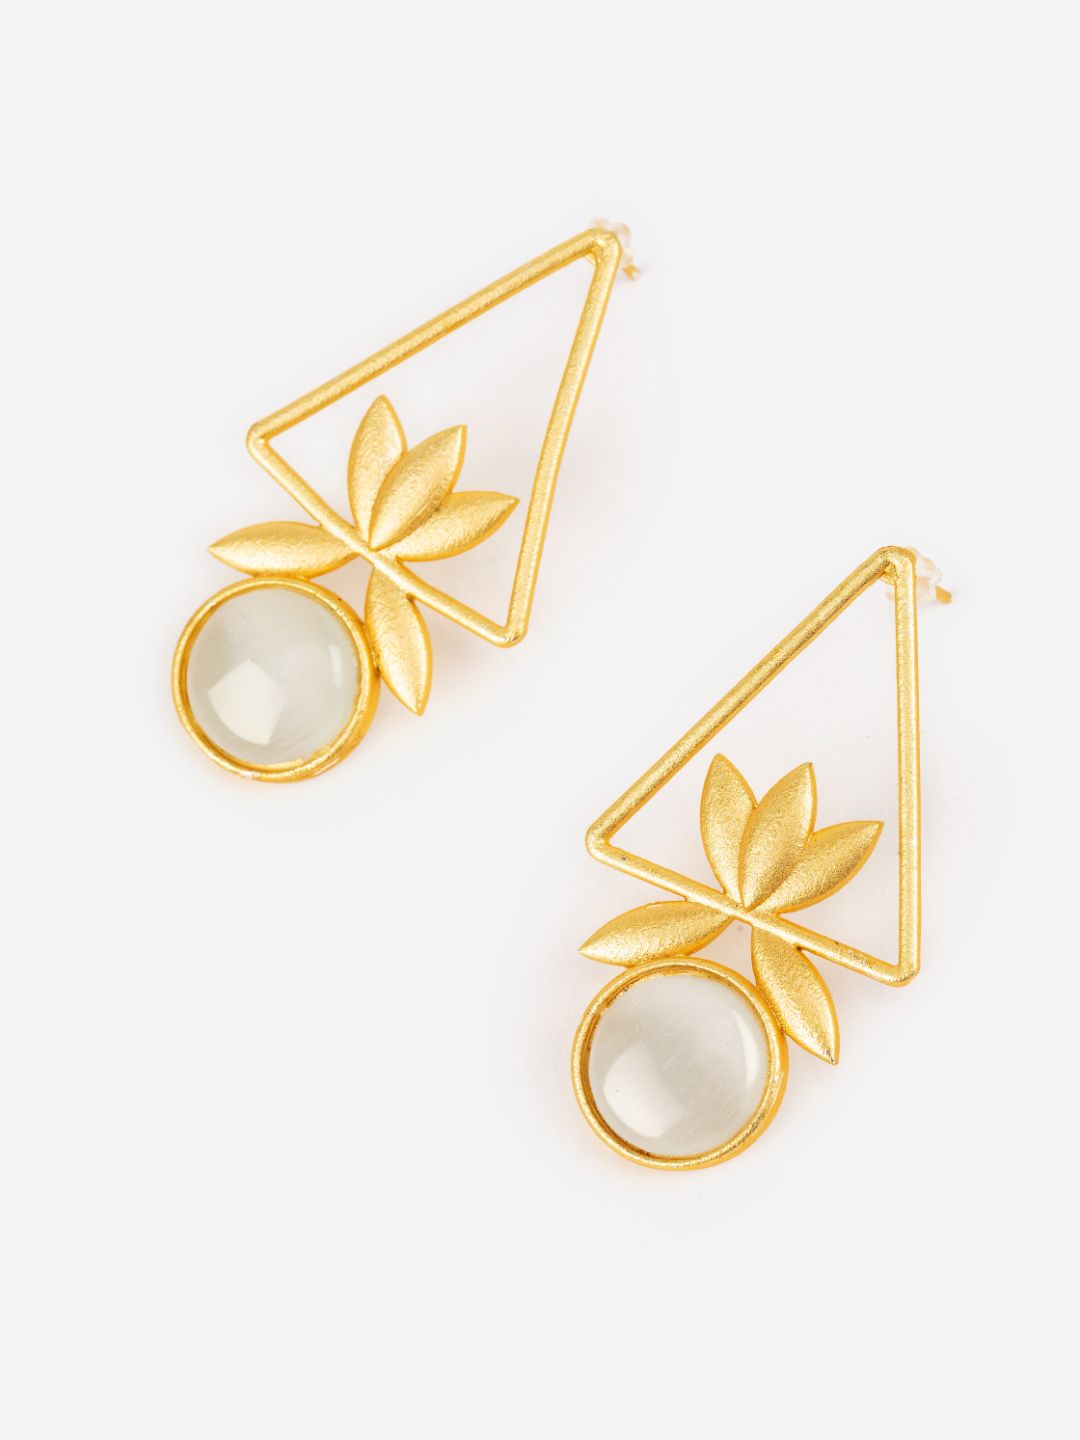 White Stone Studded Floral Gold-Plated Drop Earrings